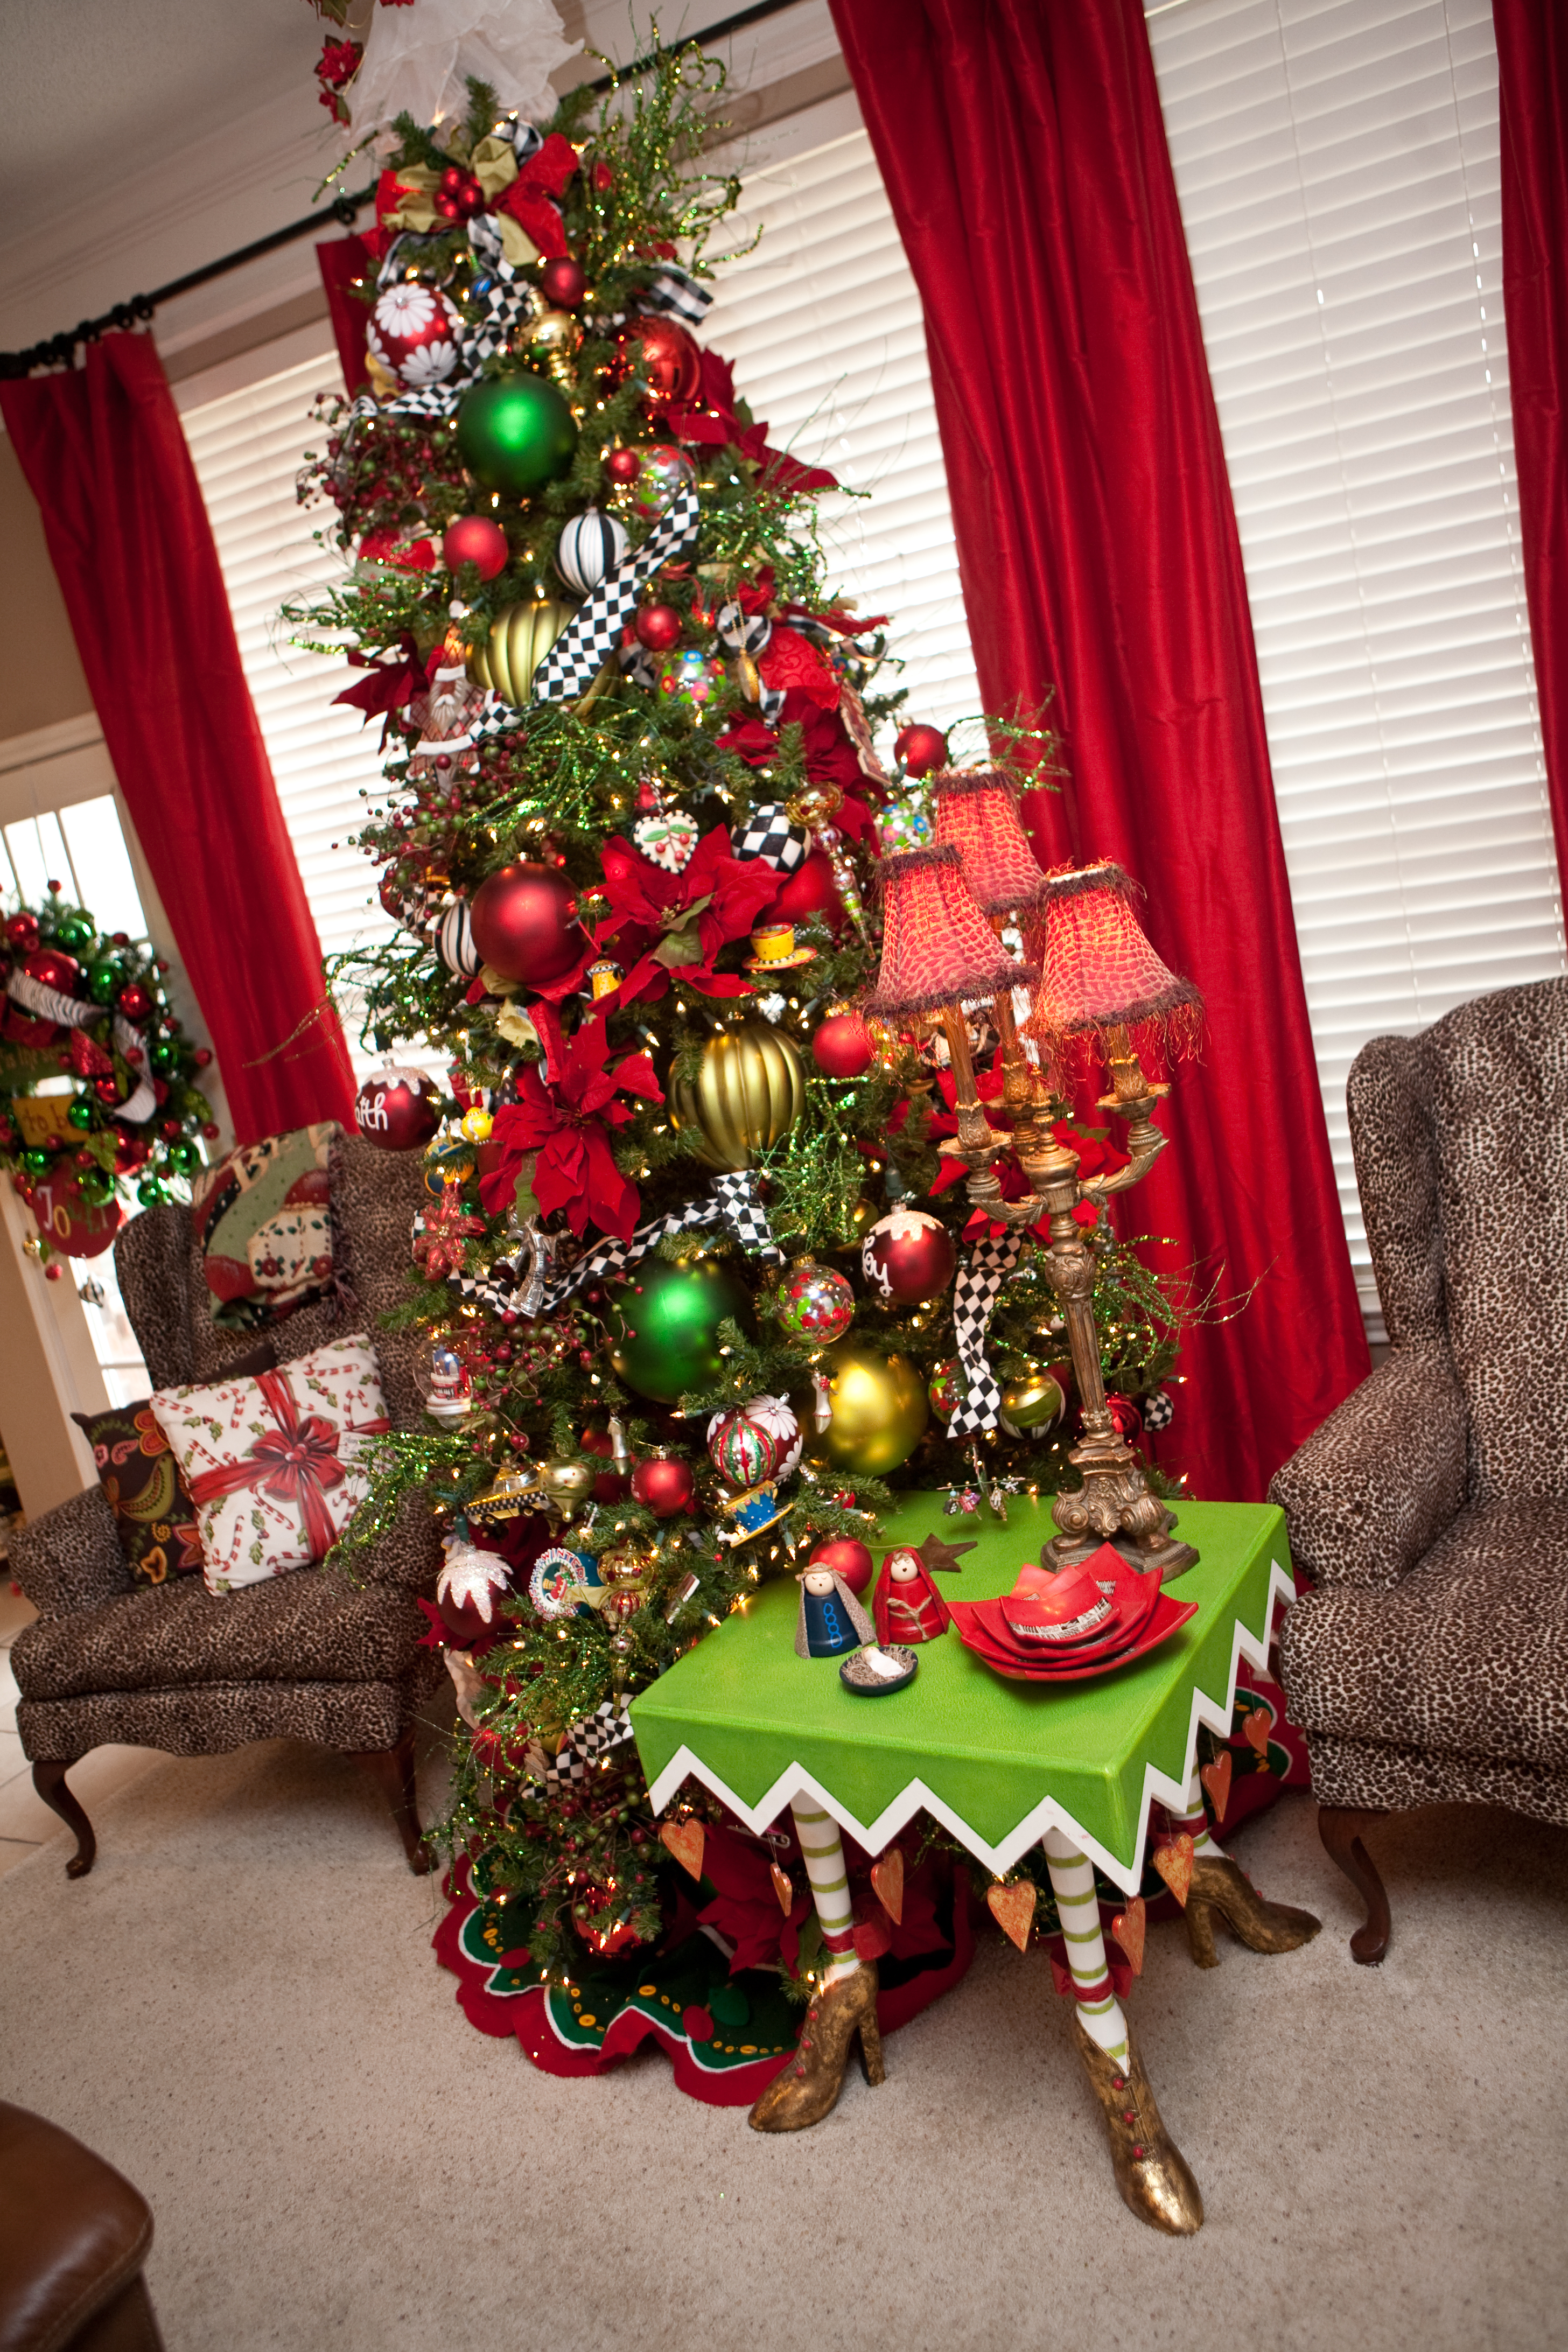 25 Awesome Whimsical Christmas Decorations Ideas - Decoration Love